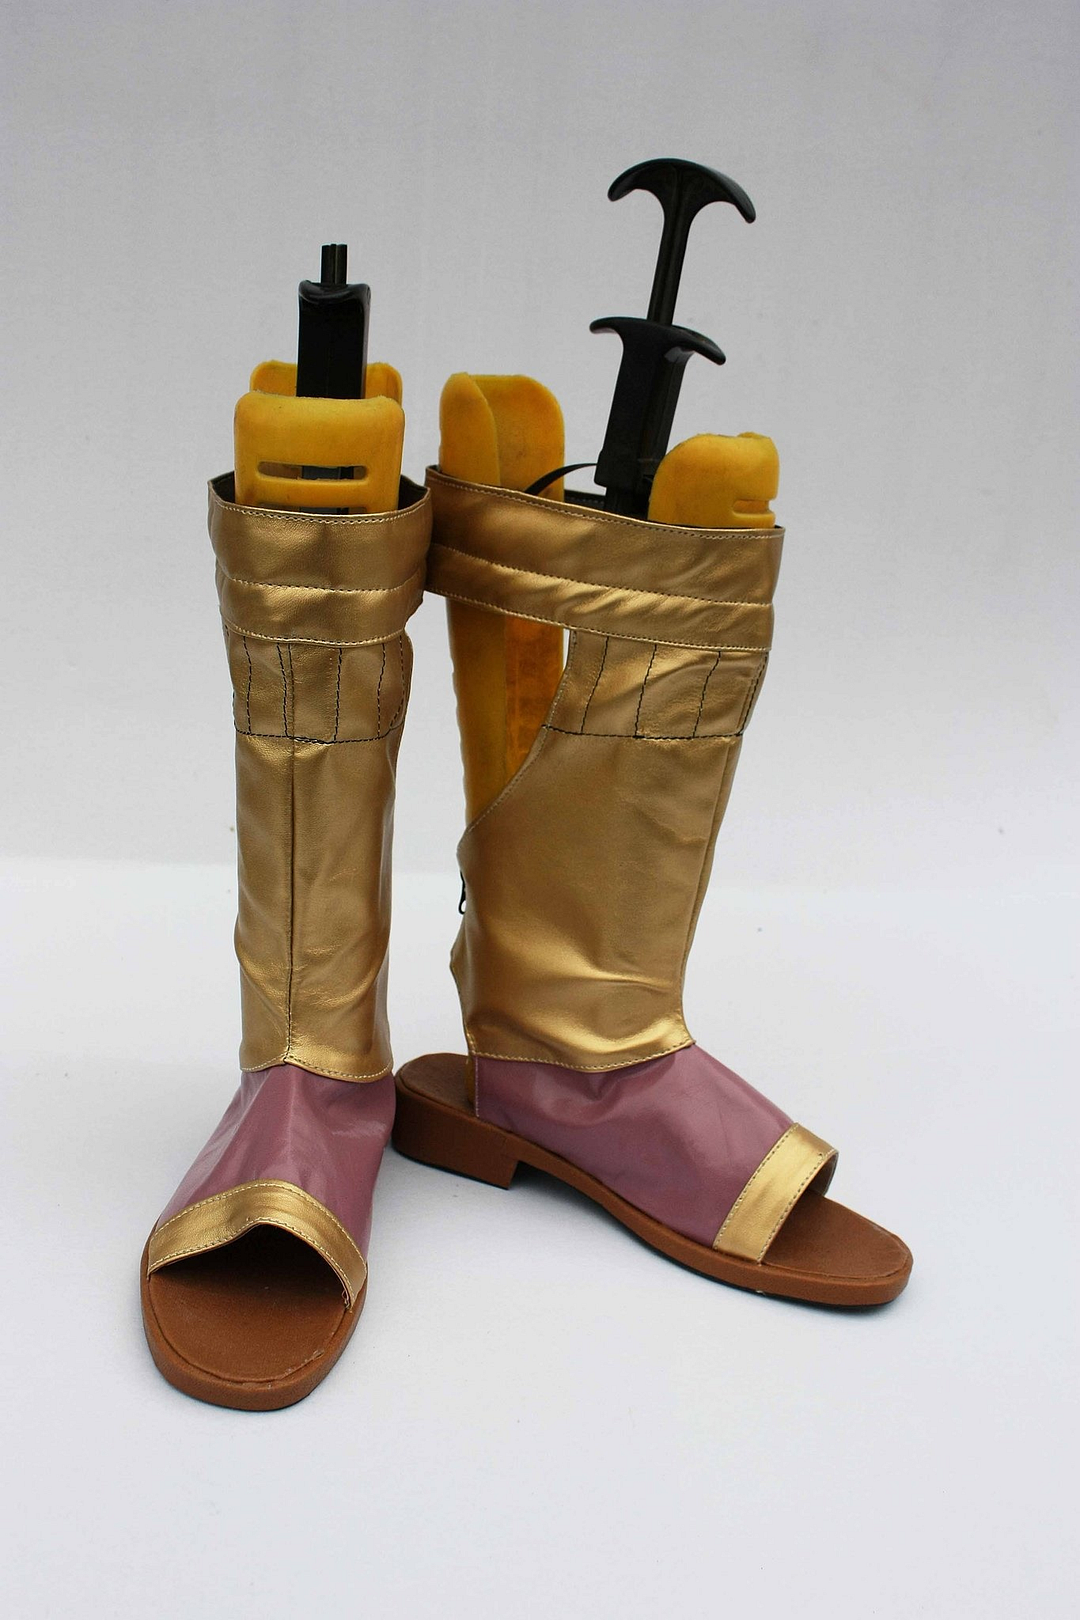 vagrant unlight jead cosplay shoes boots